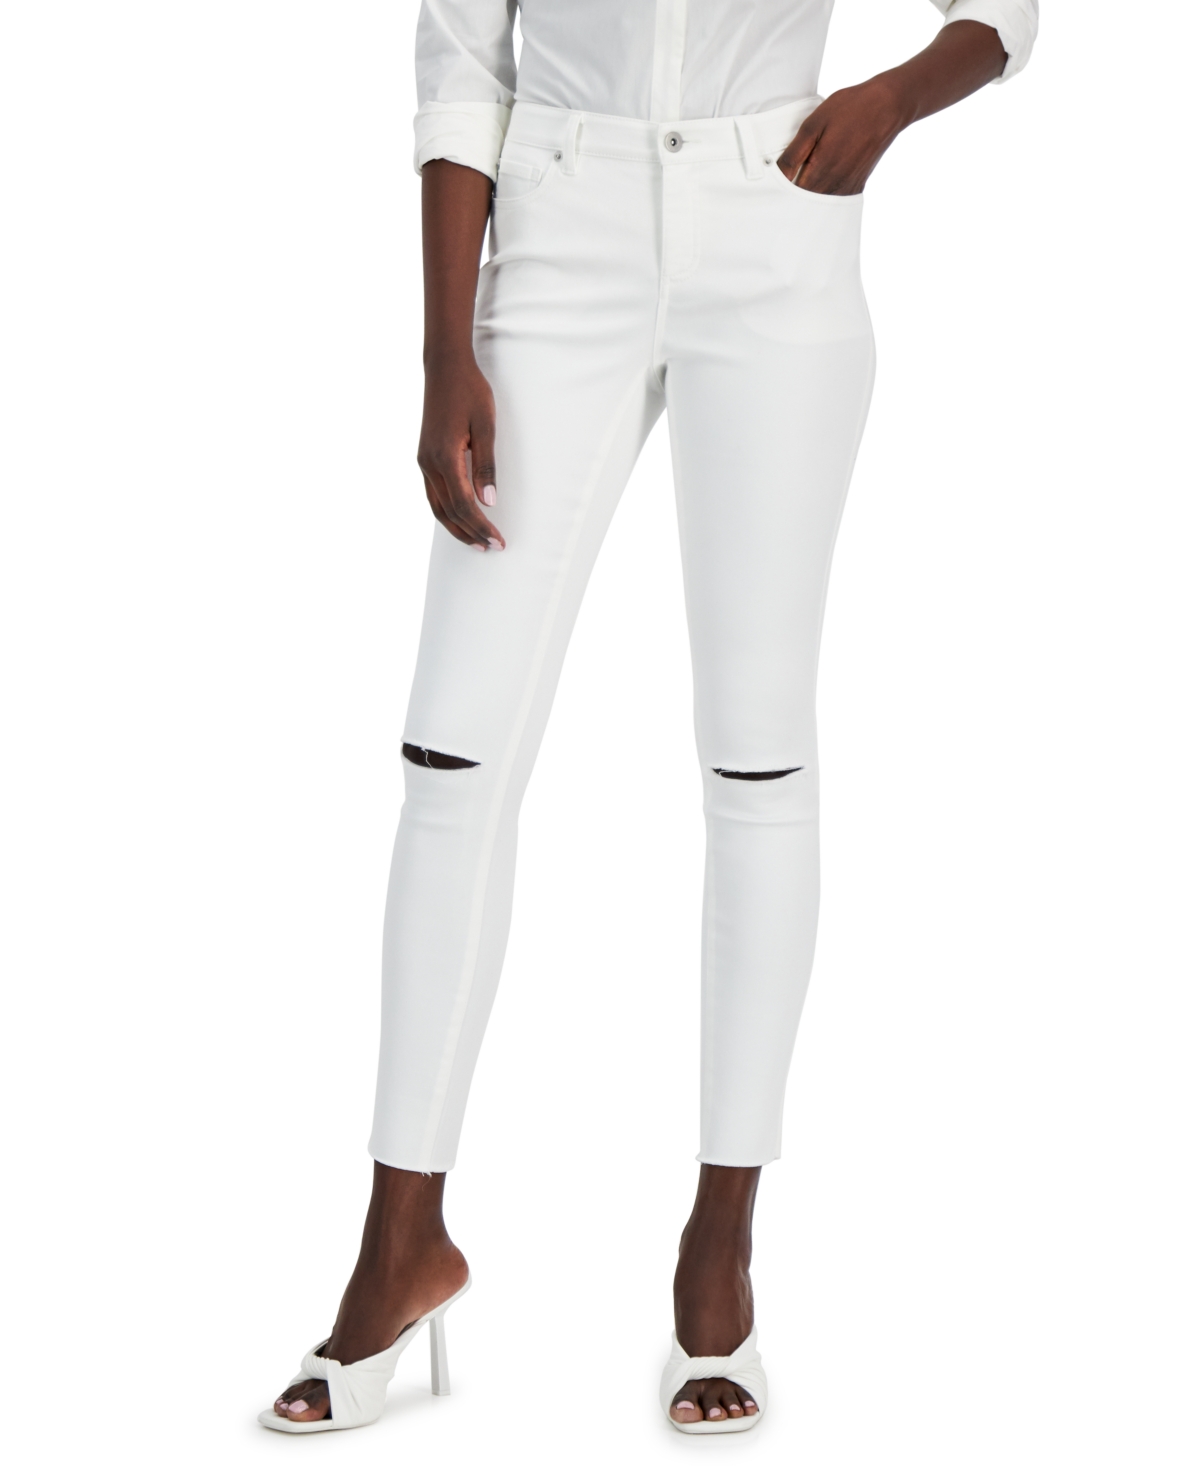  Inc International Concepts Women's Curvy Mid-Rise Ripped Skinny Jeans, Created for Macy's